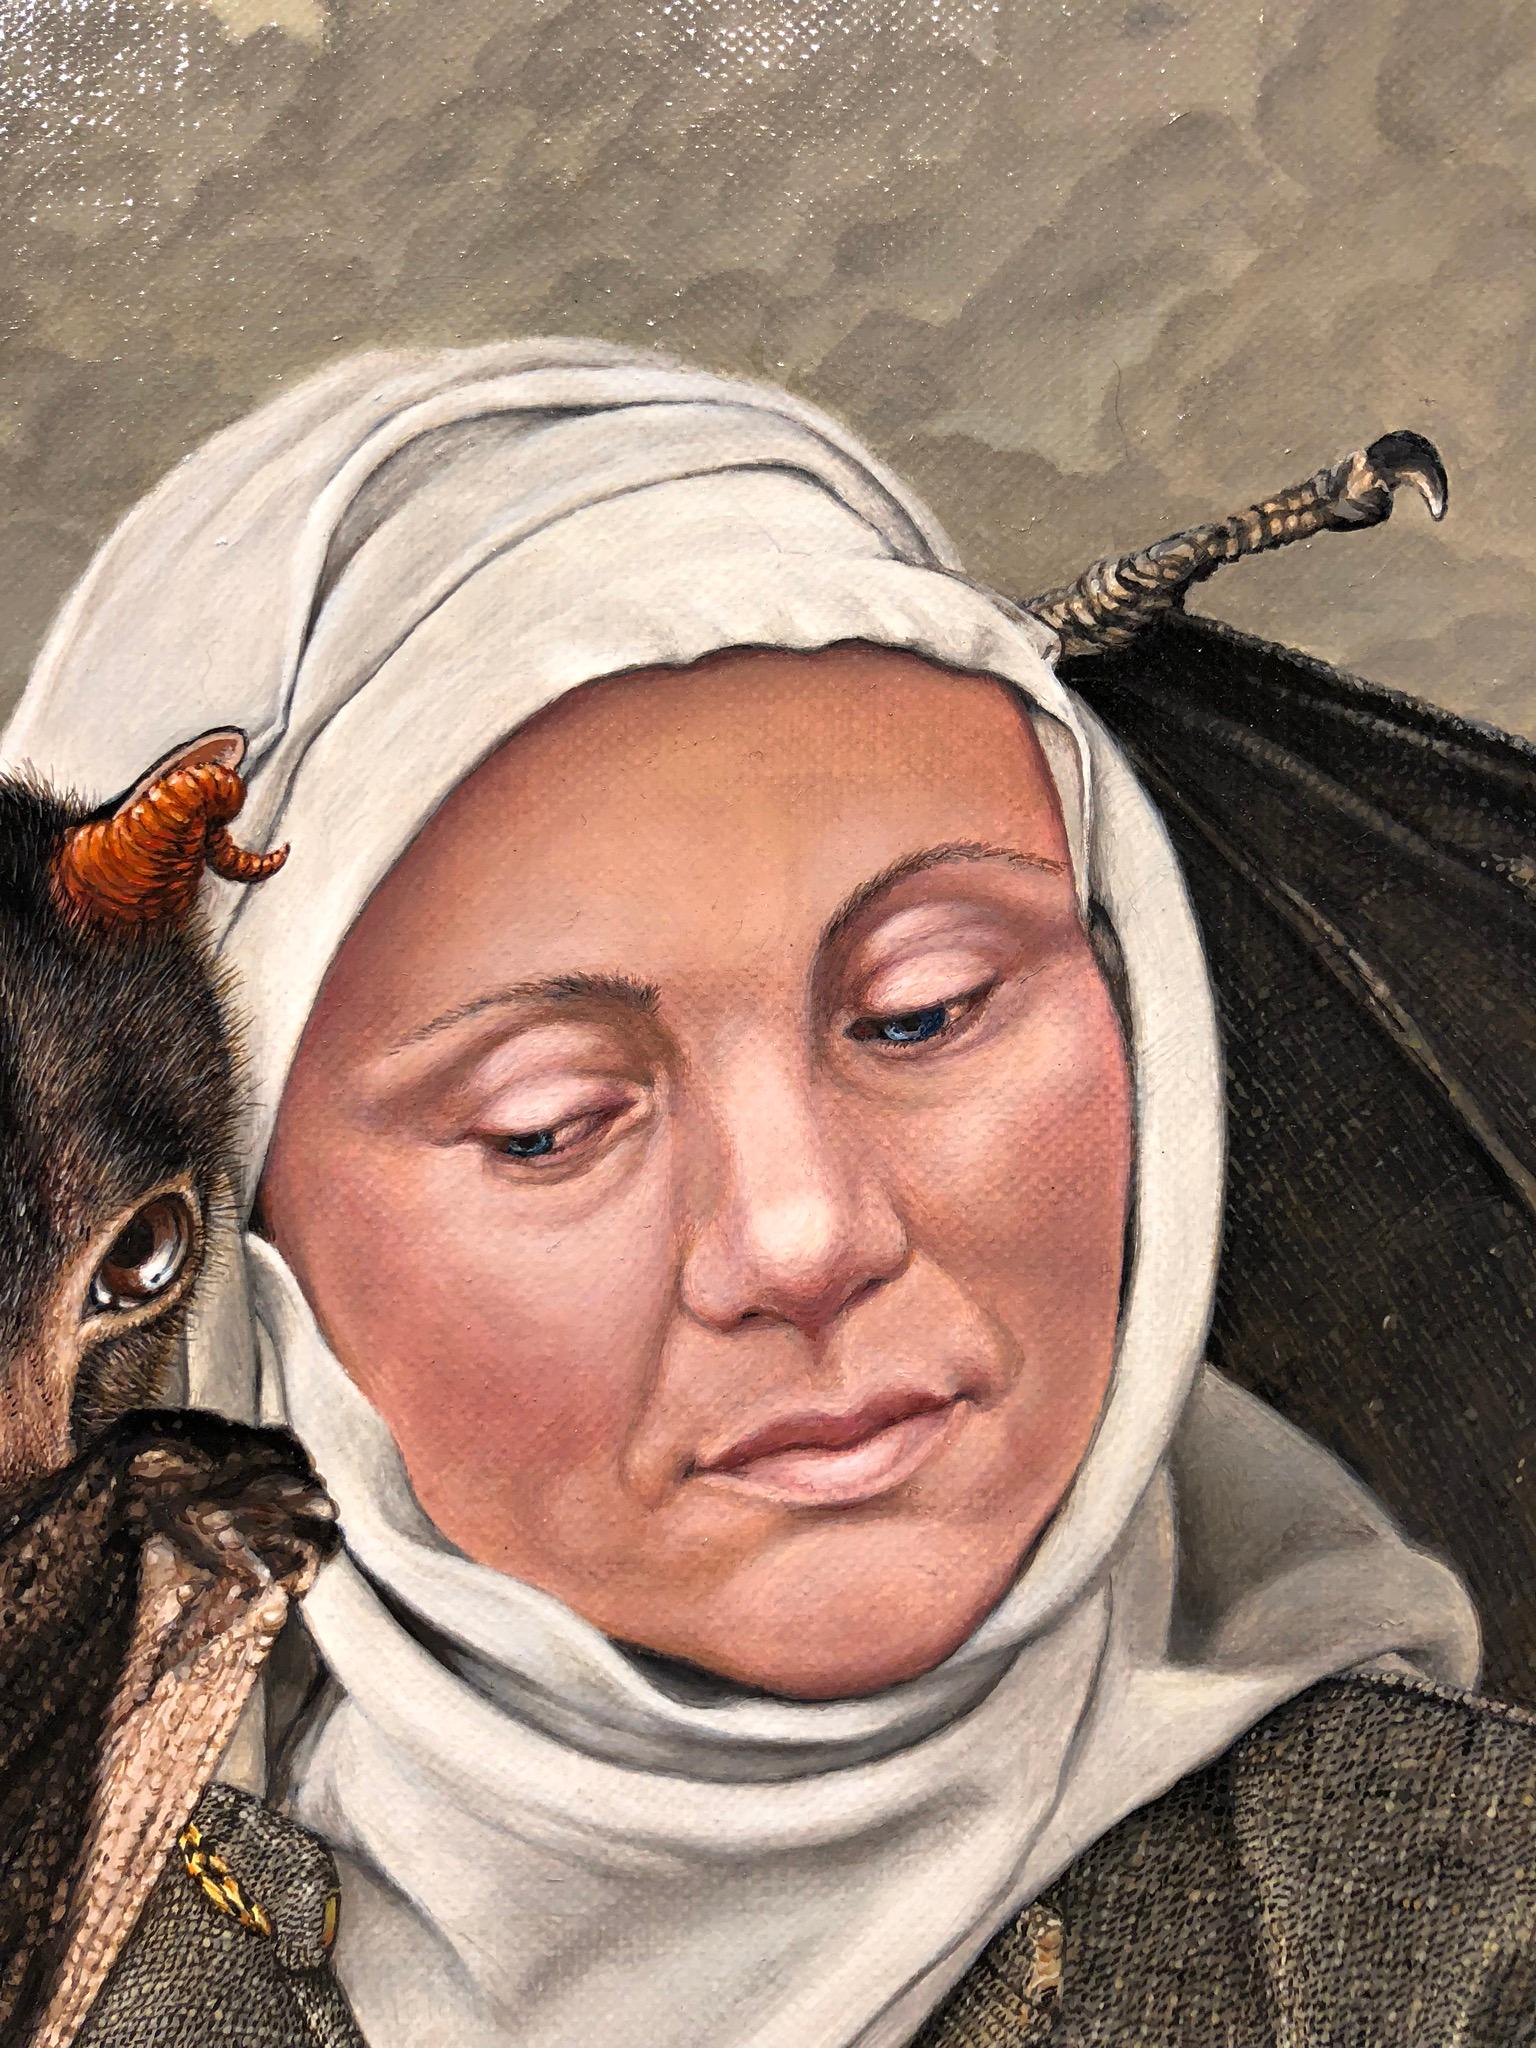 Temptation of St. Anthony, Surrealist Oil Painting with Female, Bat and Saint 1